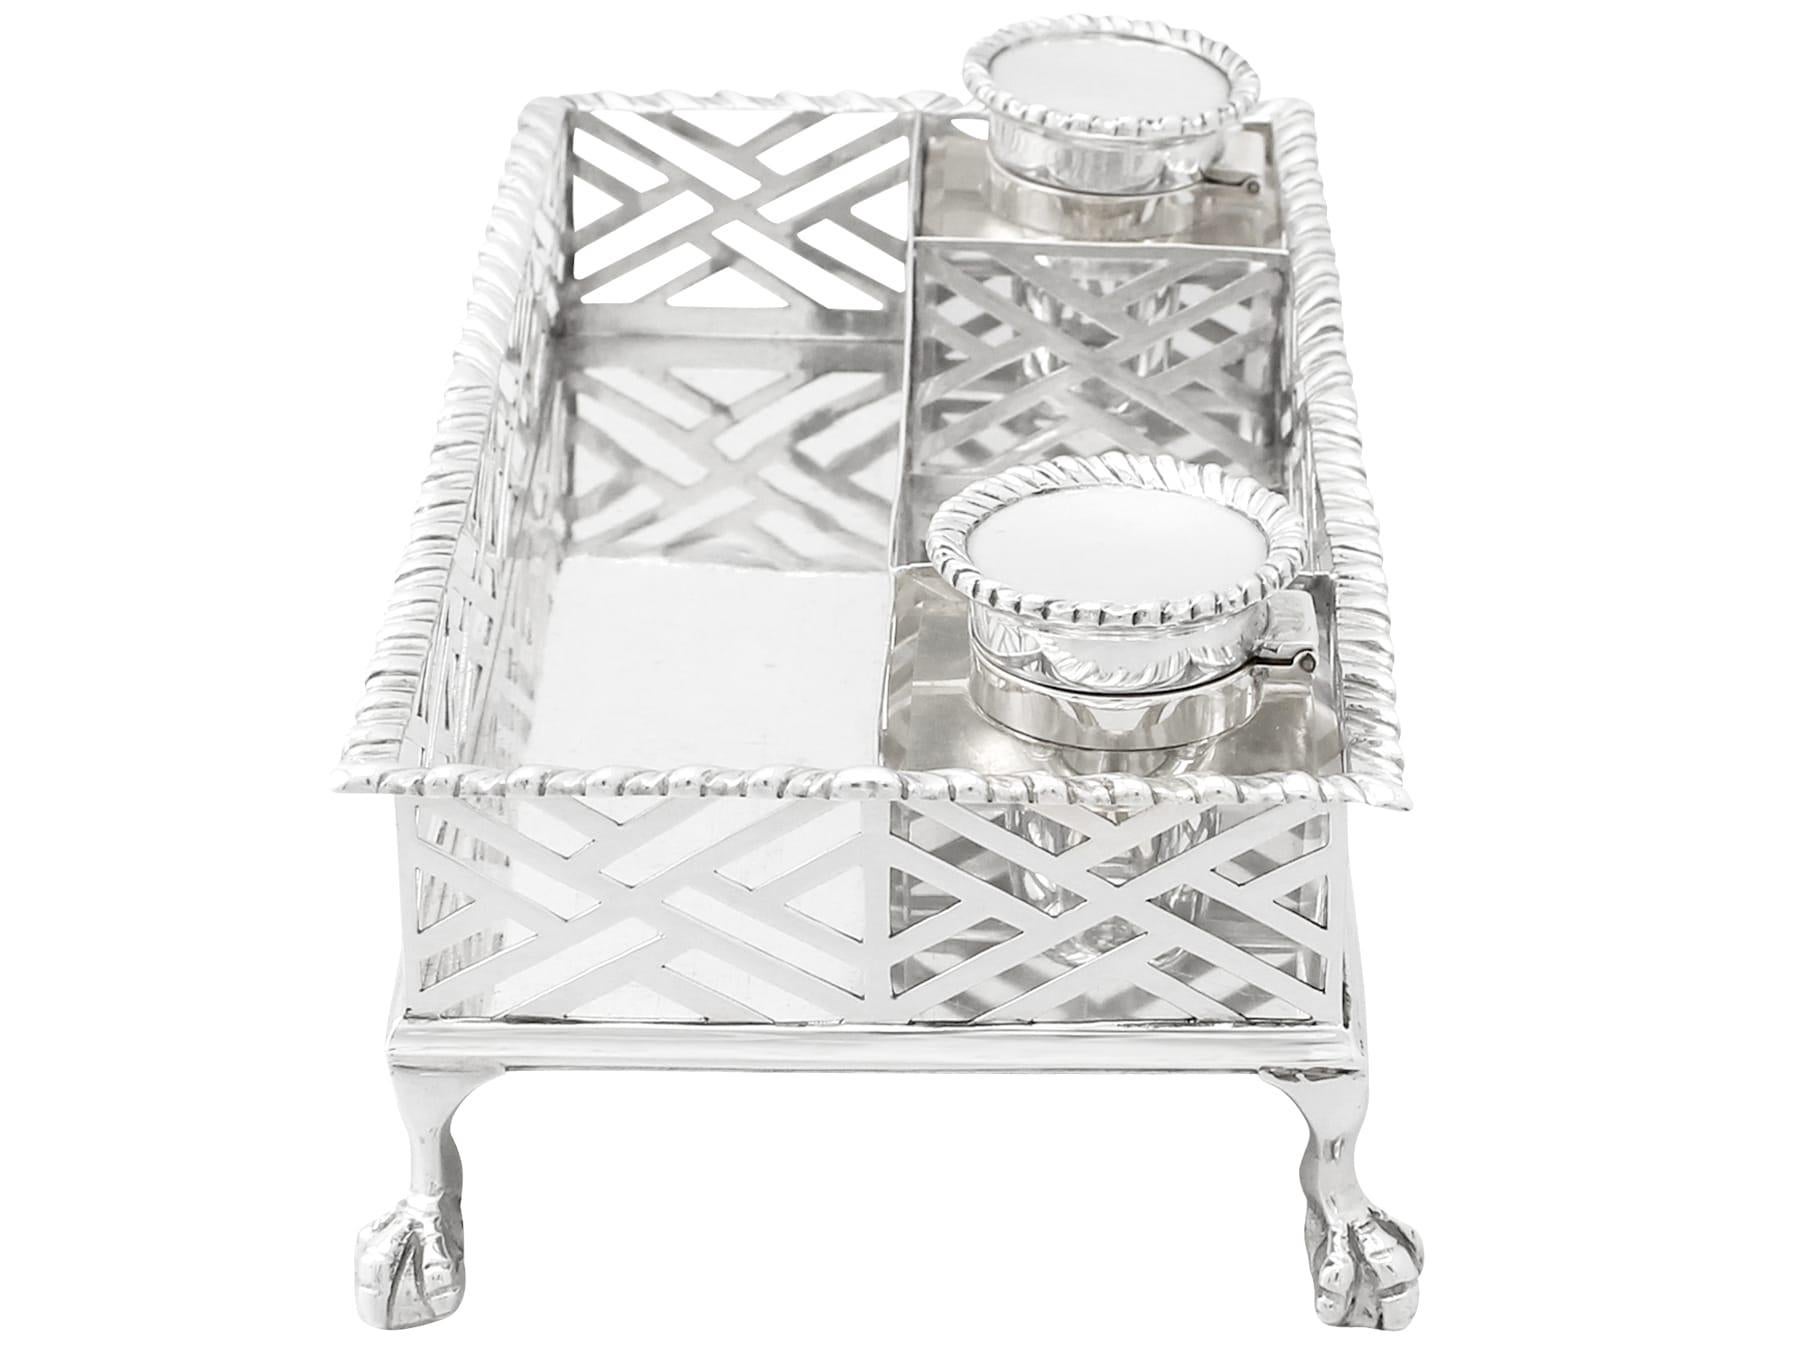 An exceptional, fine and impressive antique George V English sterling silver gallery inkstand; an addition to our ornamental office silverware collection

This exceptional antique George V sterling silver gallery inkstand has a rectangular